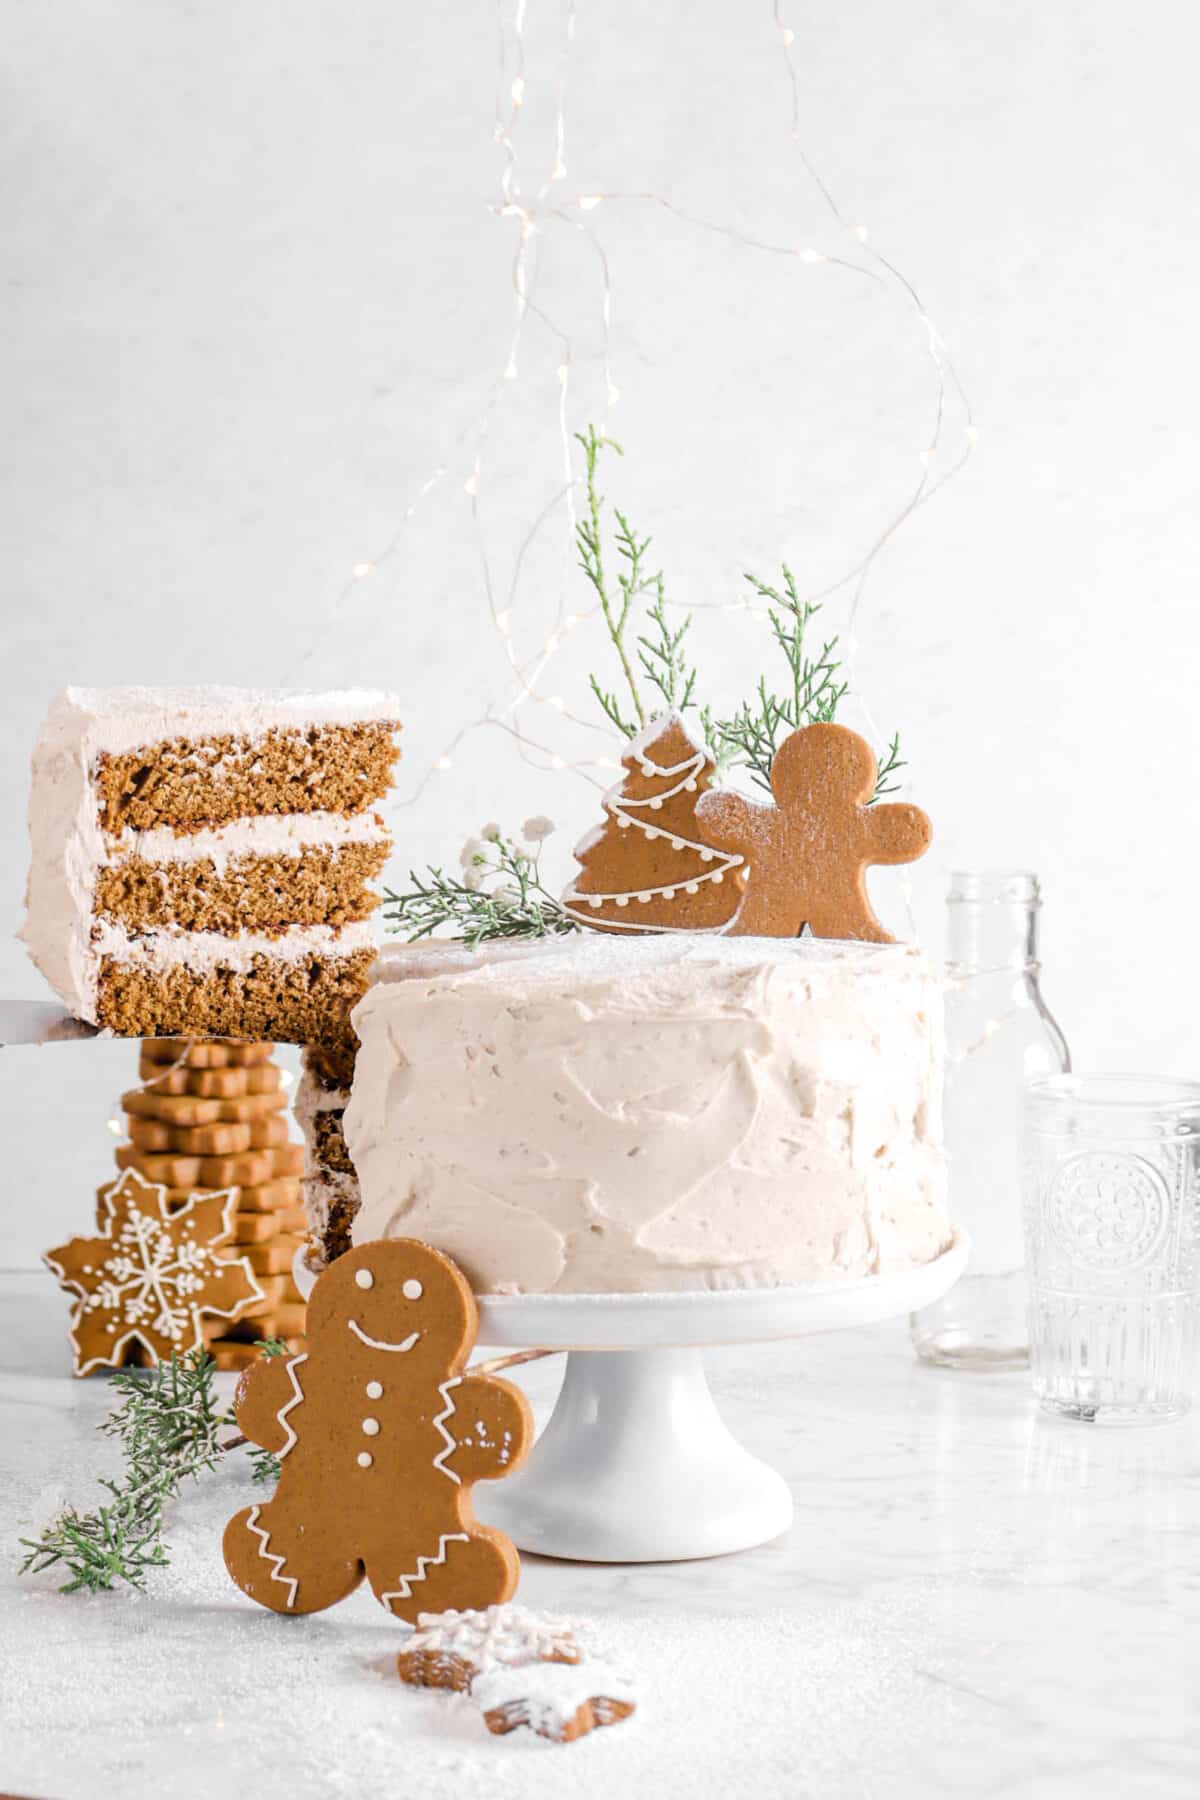 cake slice being pulled away from cake with gingerbread cookies, greenery, and glasses